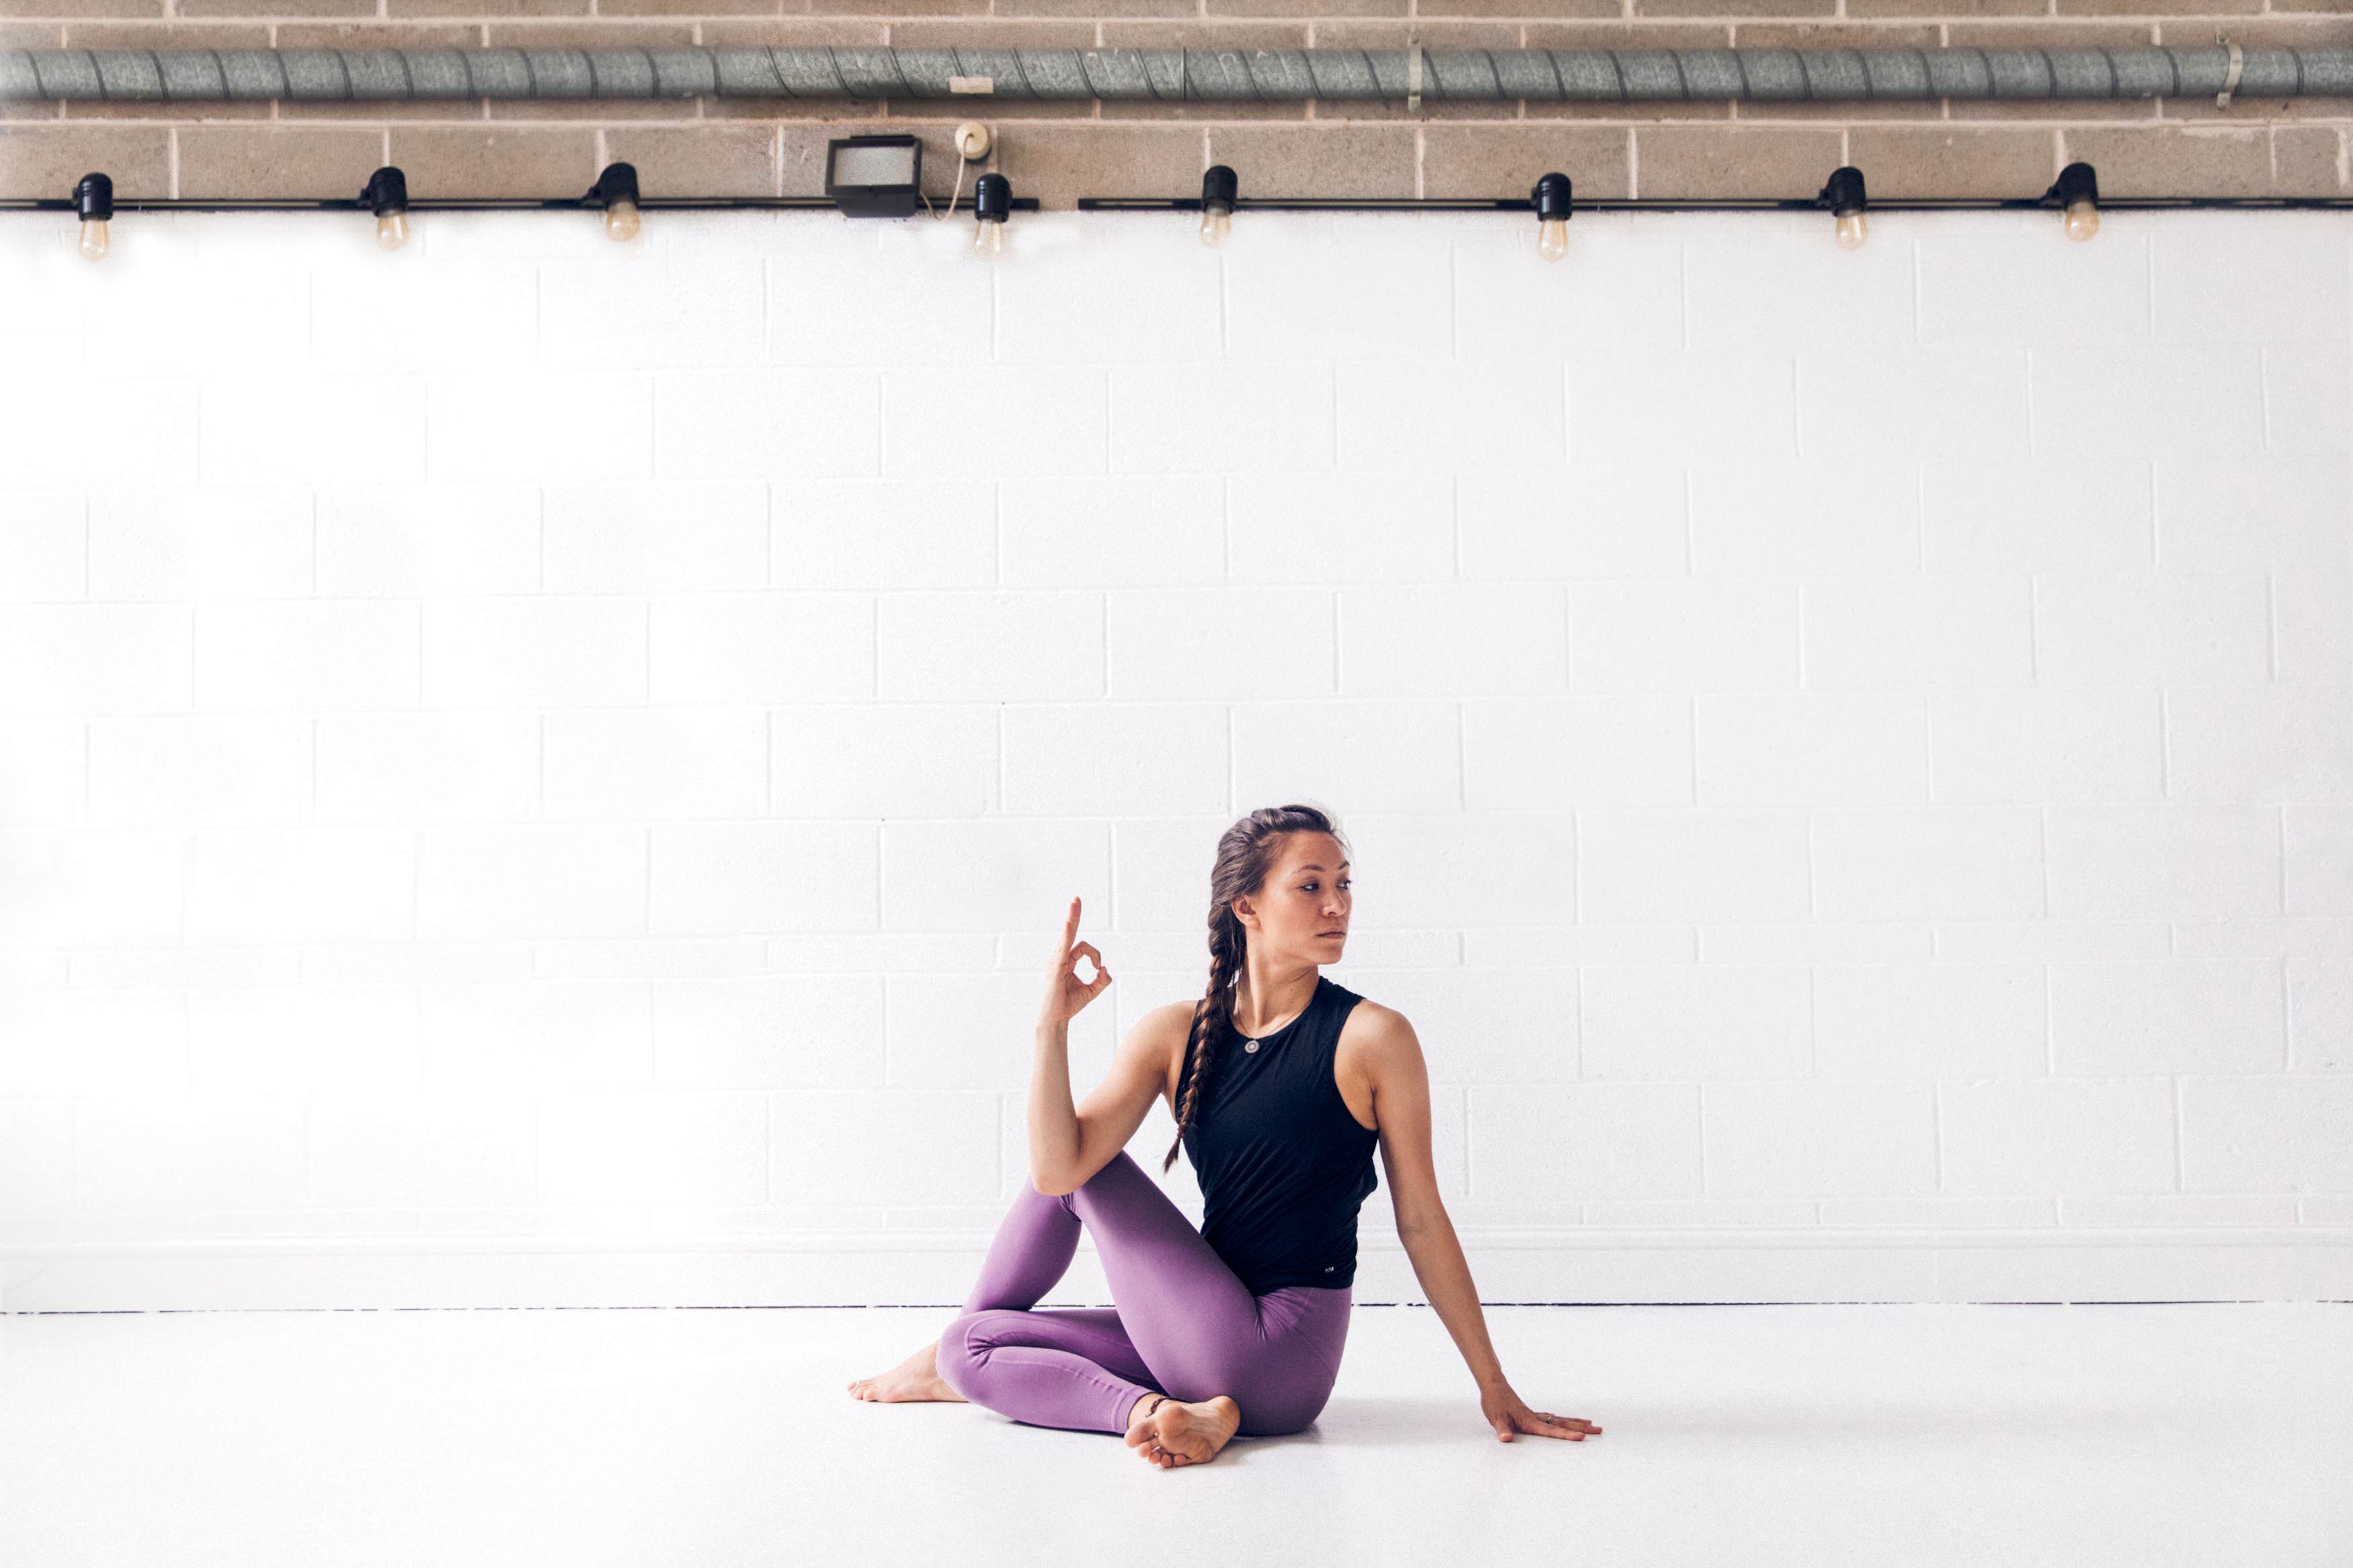 Somatic Twist Yoga Sequence 20-Min Class for beginners - Di Hickman